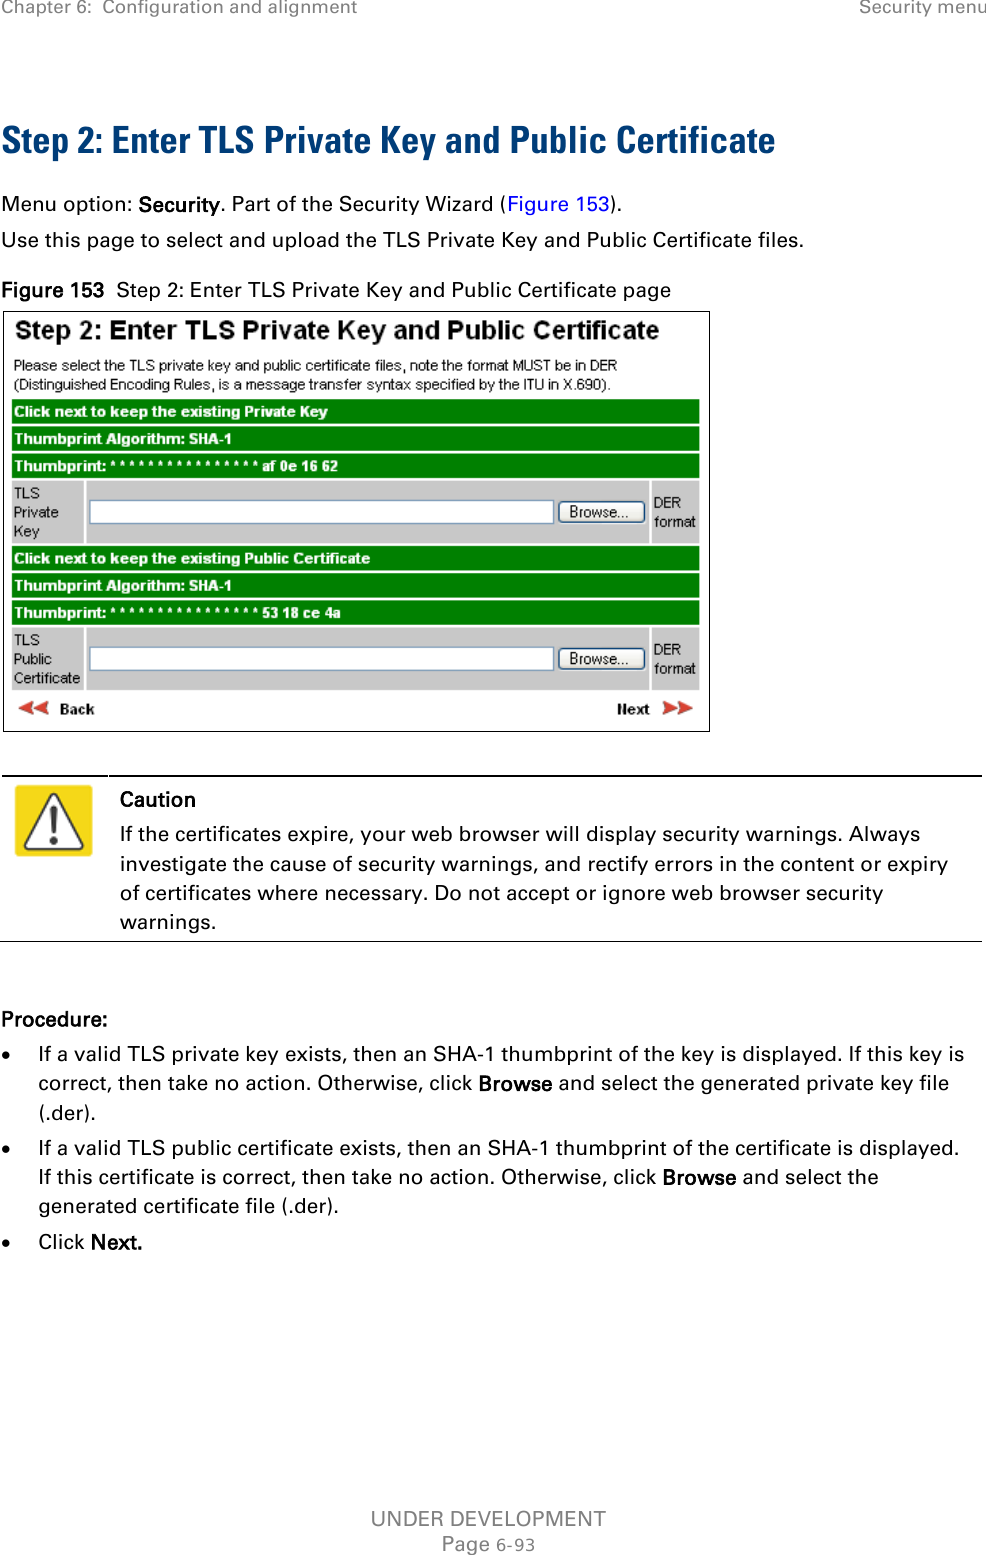 Chapter 6:  Configuration and alignment Security menu  Step 2: Enter TLS Private Key and Public Certificate Menu option: Security. Part of the Security Wizard (Figure 153). Use this page to select and upload the TLS Private Key and Public Certificate files. Figure 153  Step 2: Enter TLS Private Key and Public Certificate page    Caution If the certificates expire, your web browser will display security warnings. Always investigate the cause of security warnings, and rectify errors in the content or expiry of certificates where necessary. Do not accept or ignore web browser security warnings.  Procedure: • If a valid TLS private key exists, then an SHA-1 thumbprint of the key is displayed. If this key is correct, then take no action. Otherwise, click Browse and select the generated private key file (.der). • If a valid TLS public certificate exists, then an SHA-1 thumbprint of the certificate is displayed. If this certificate is correct, then take no action. Otherwise, click Browse and select the generated certificate file (.der). • Click Next.    UNDER DEVELOPMENT Page 6-93 